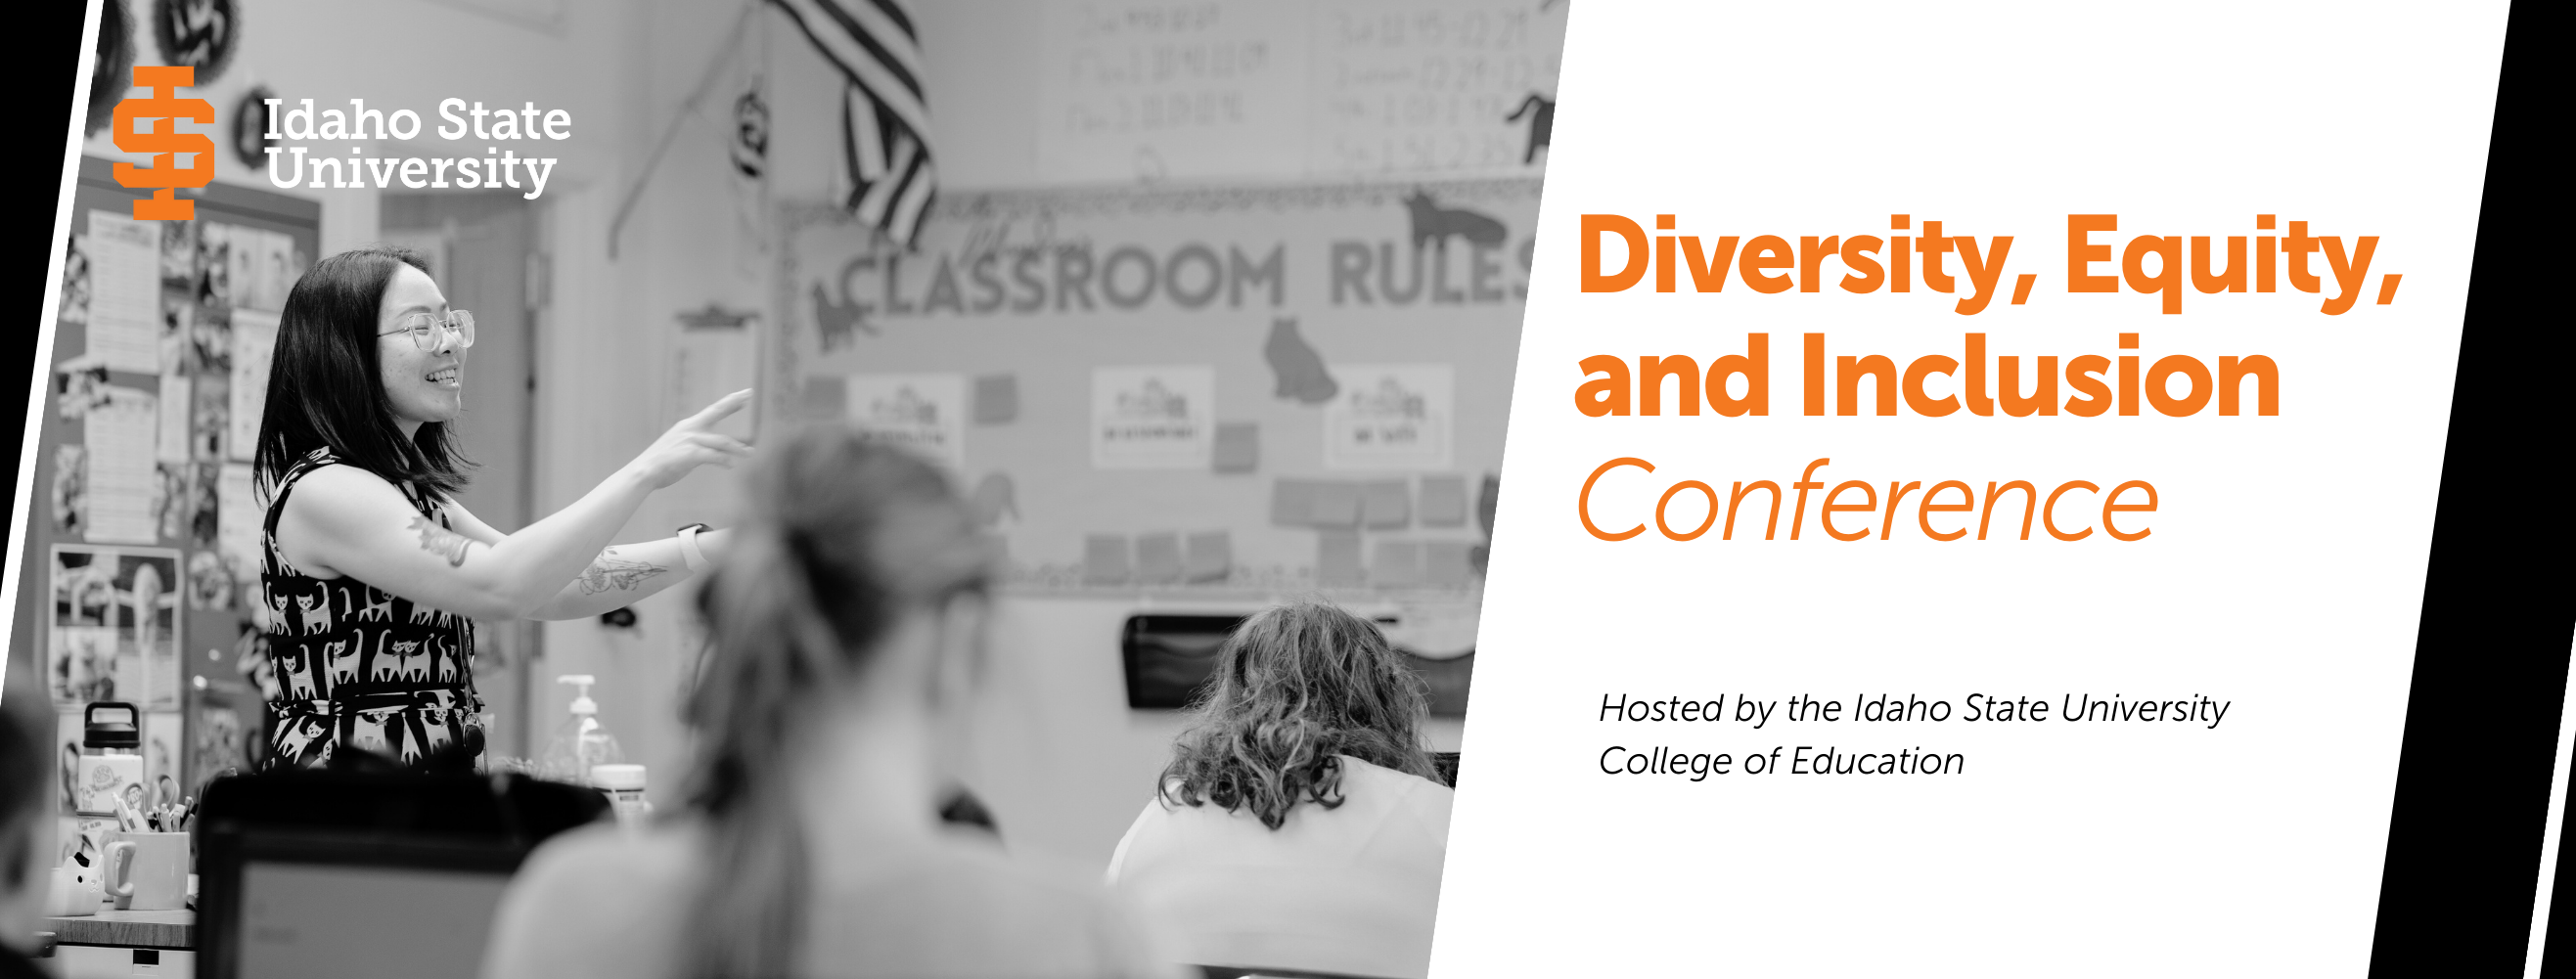 Diversity, Equity, and Inclusion in Education Conference header hosted by the Idaho State University College of Education